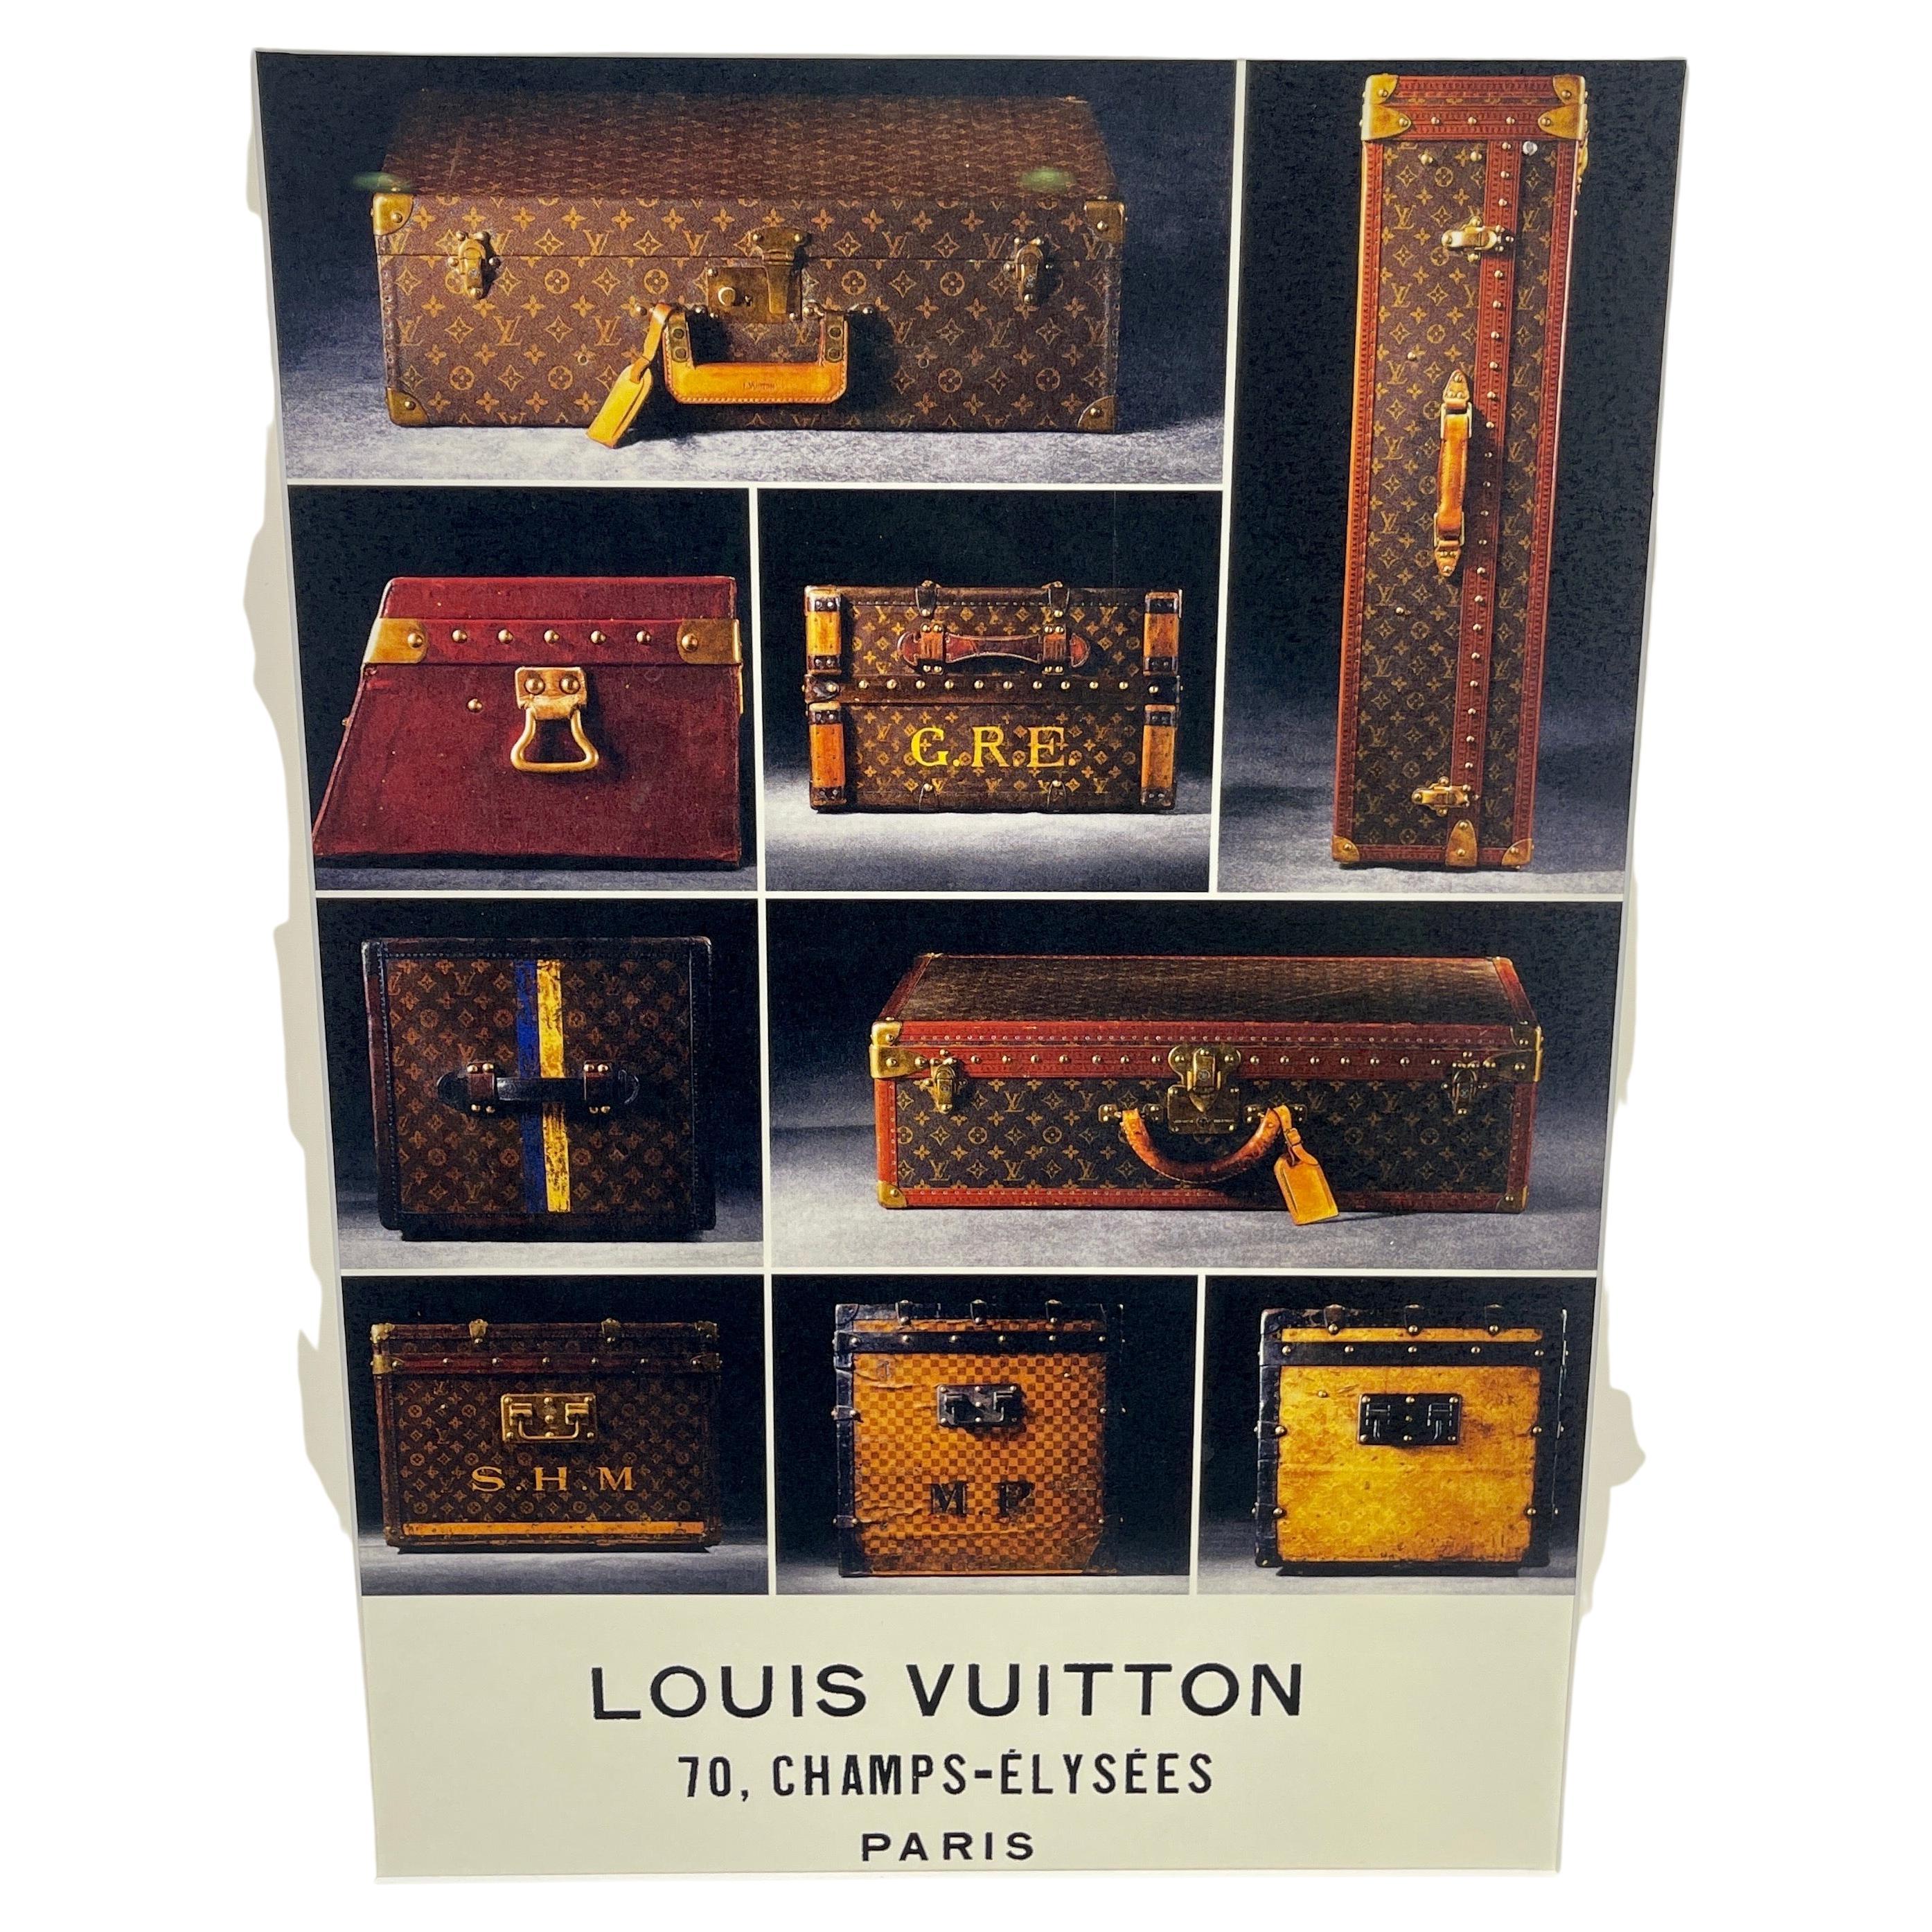 Louis Vuitton French Art Print in Vintage Gilt Frame Trunks and Suitcases In Good Condition For Sale In Haddonfield, NJ